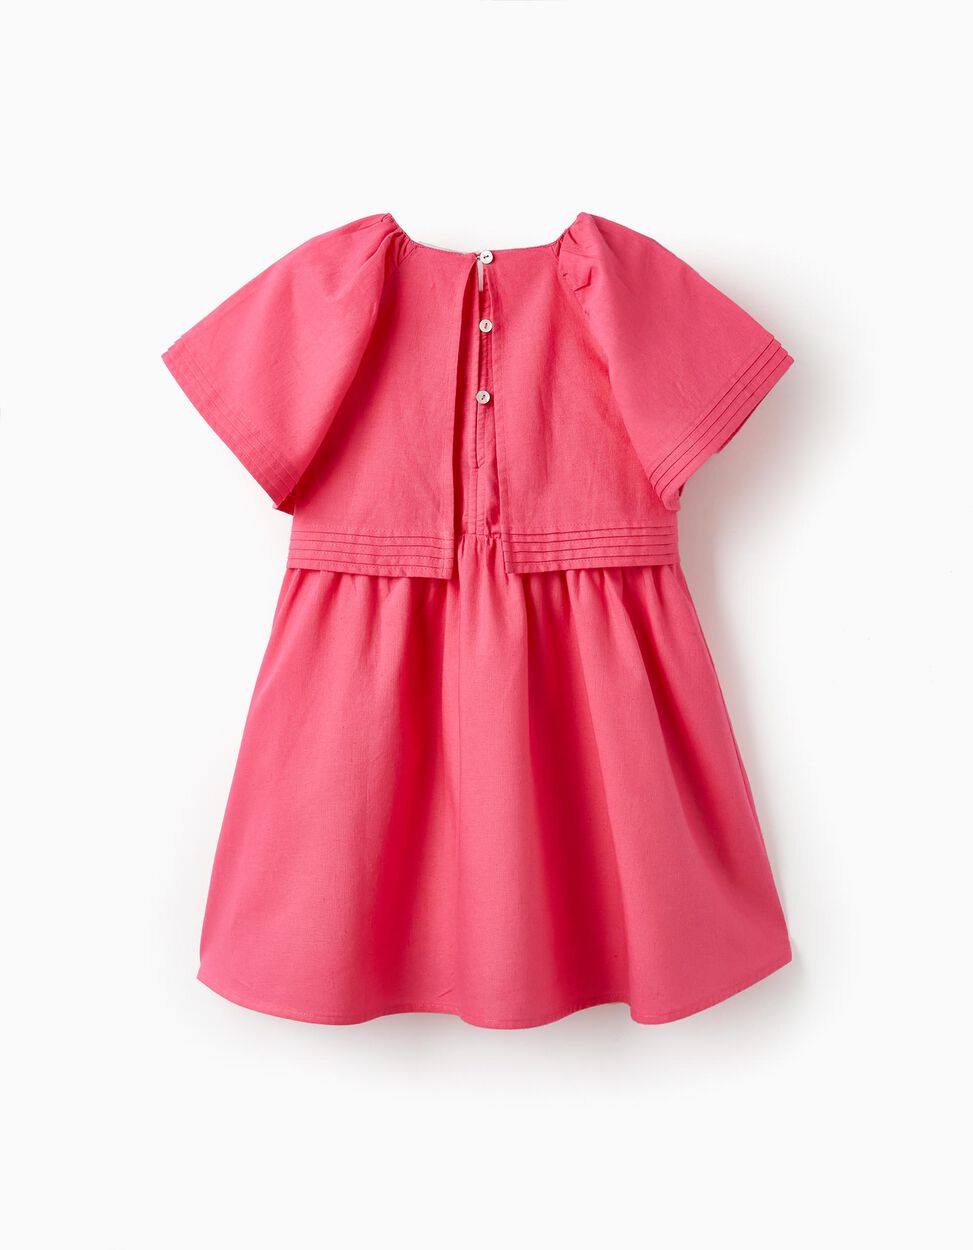 Buy Online Dress with Layers for Girls 'Special Days', Pink